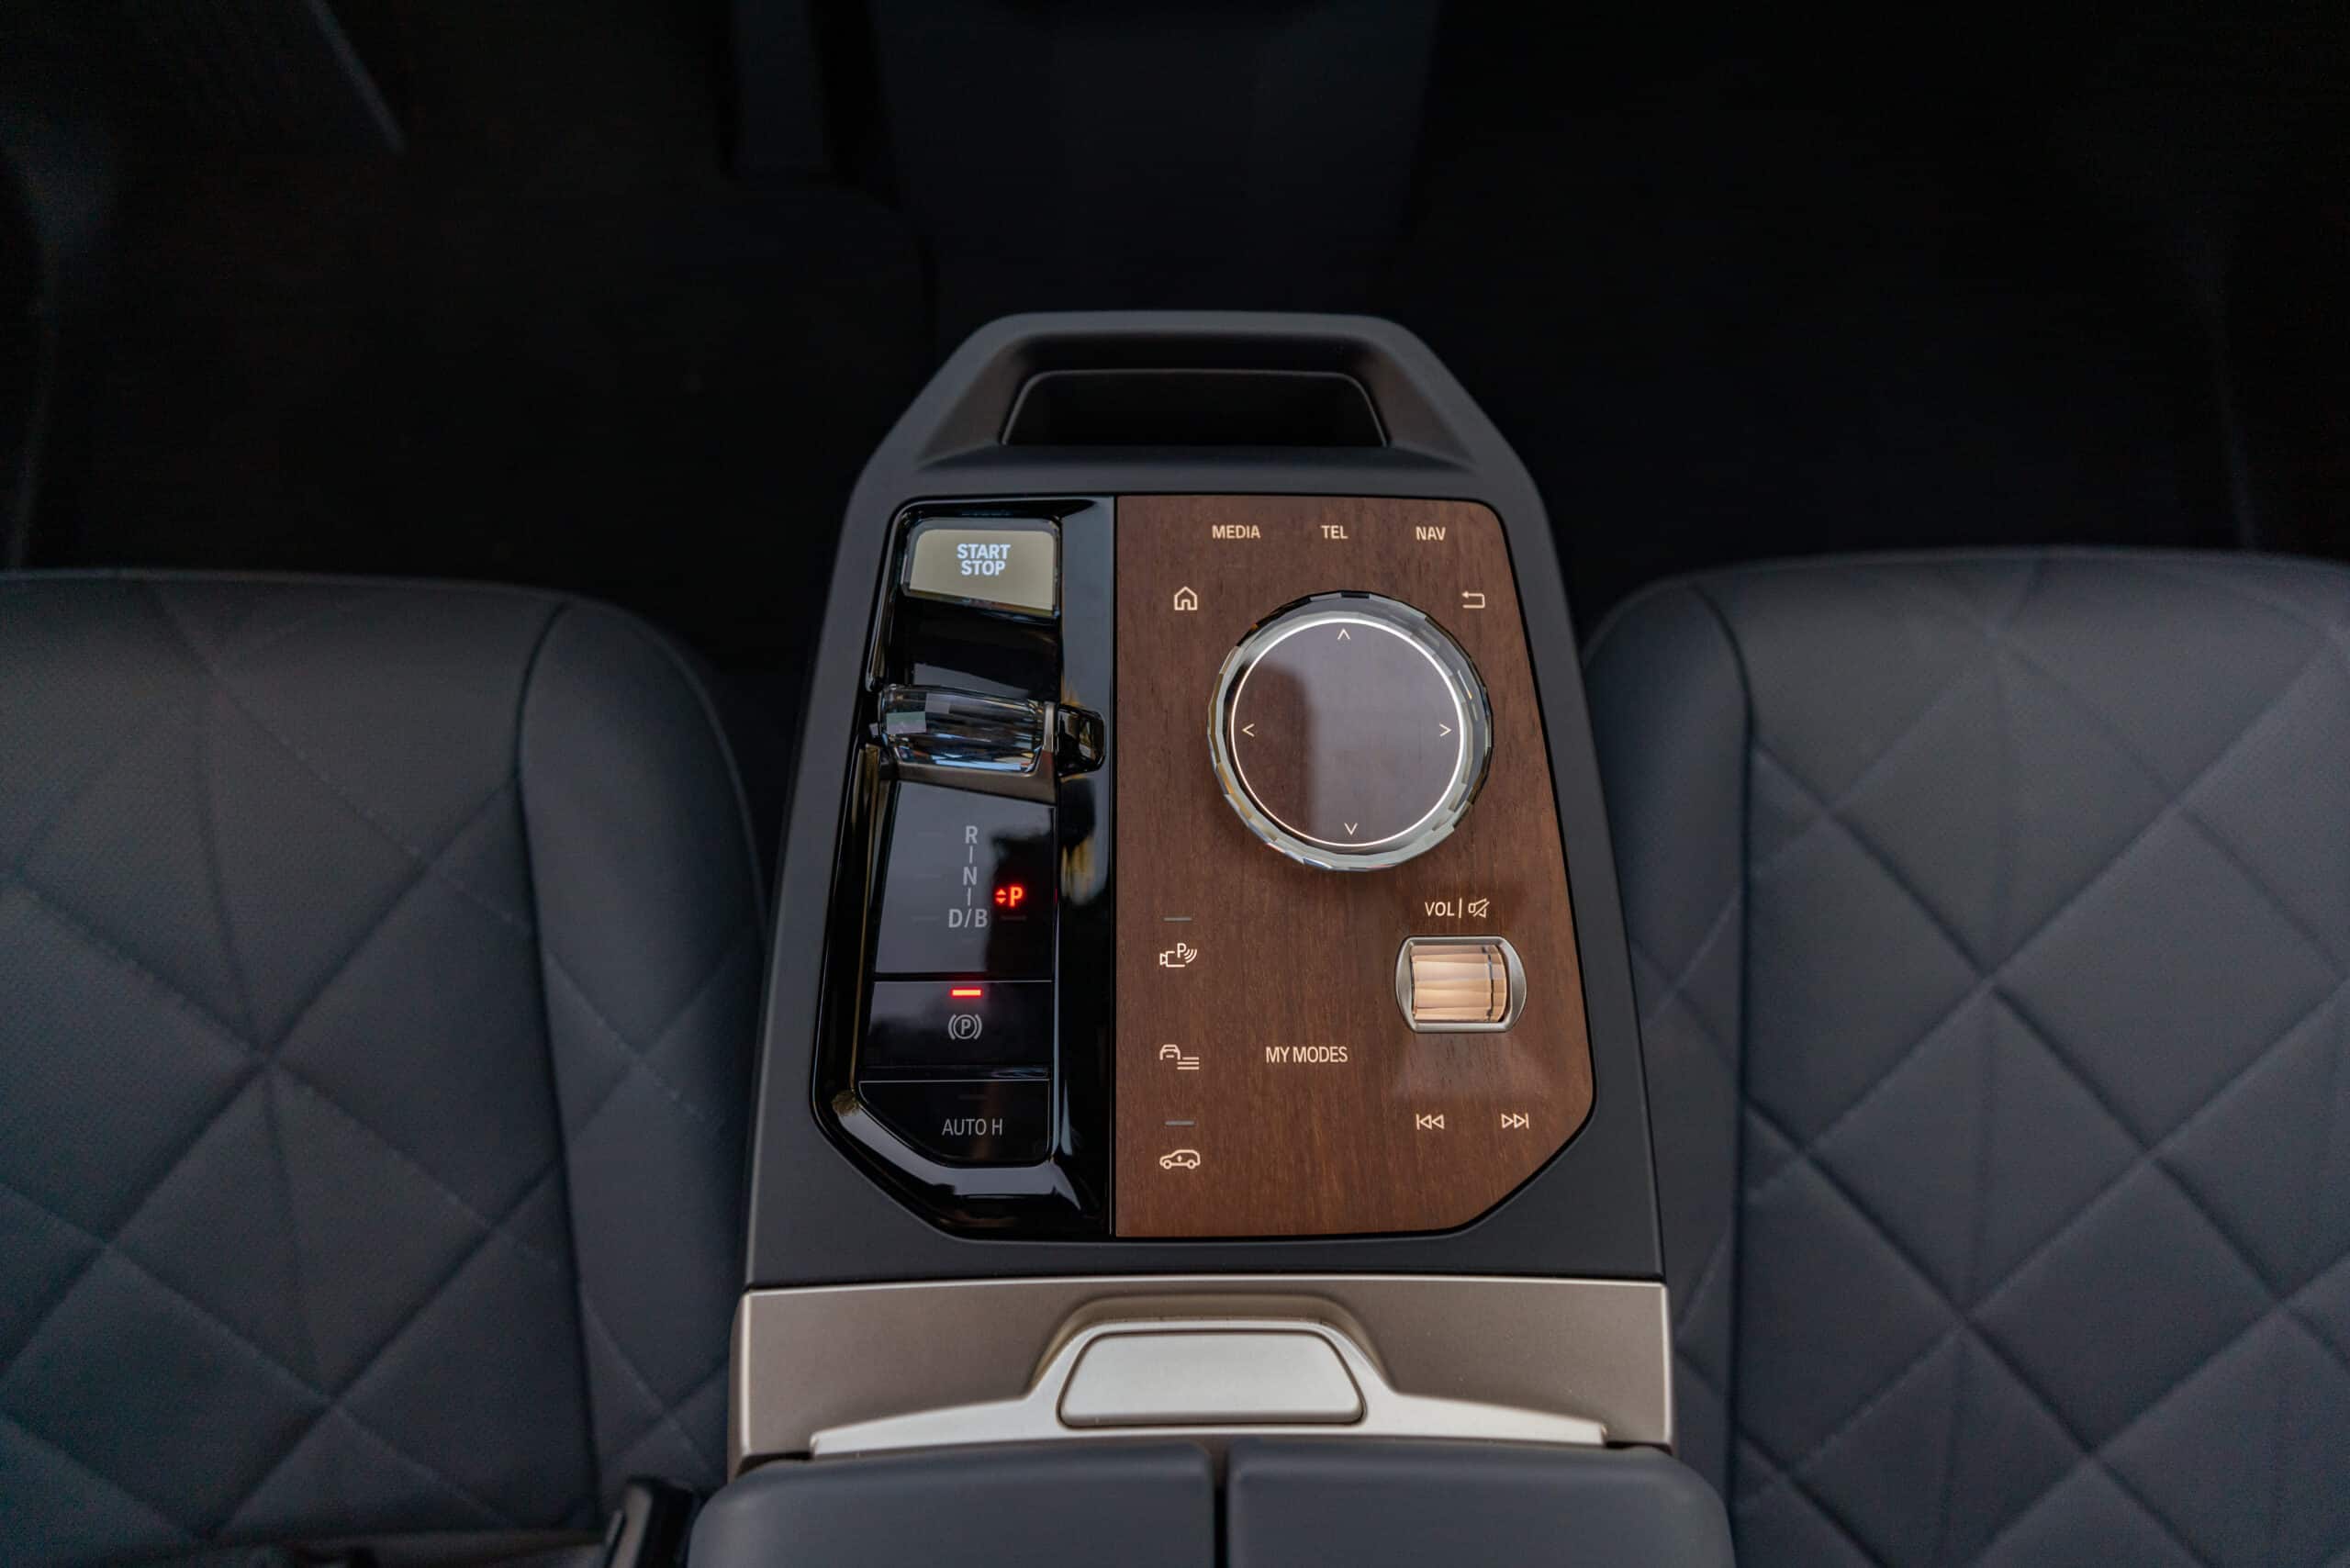 The center console of a bmw.